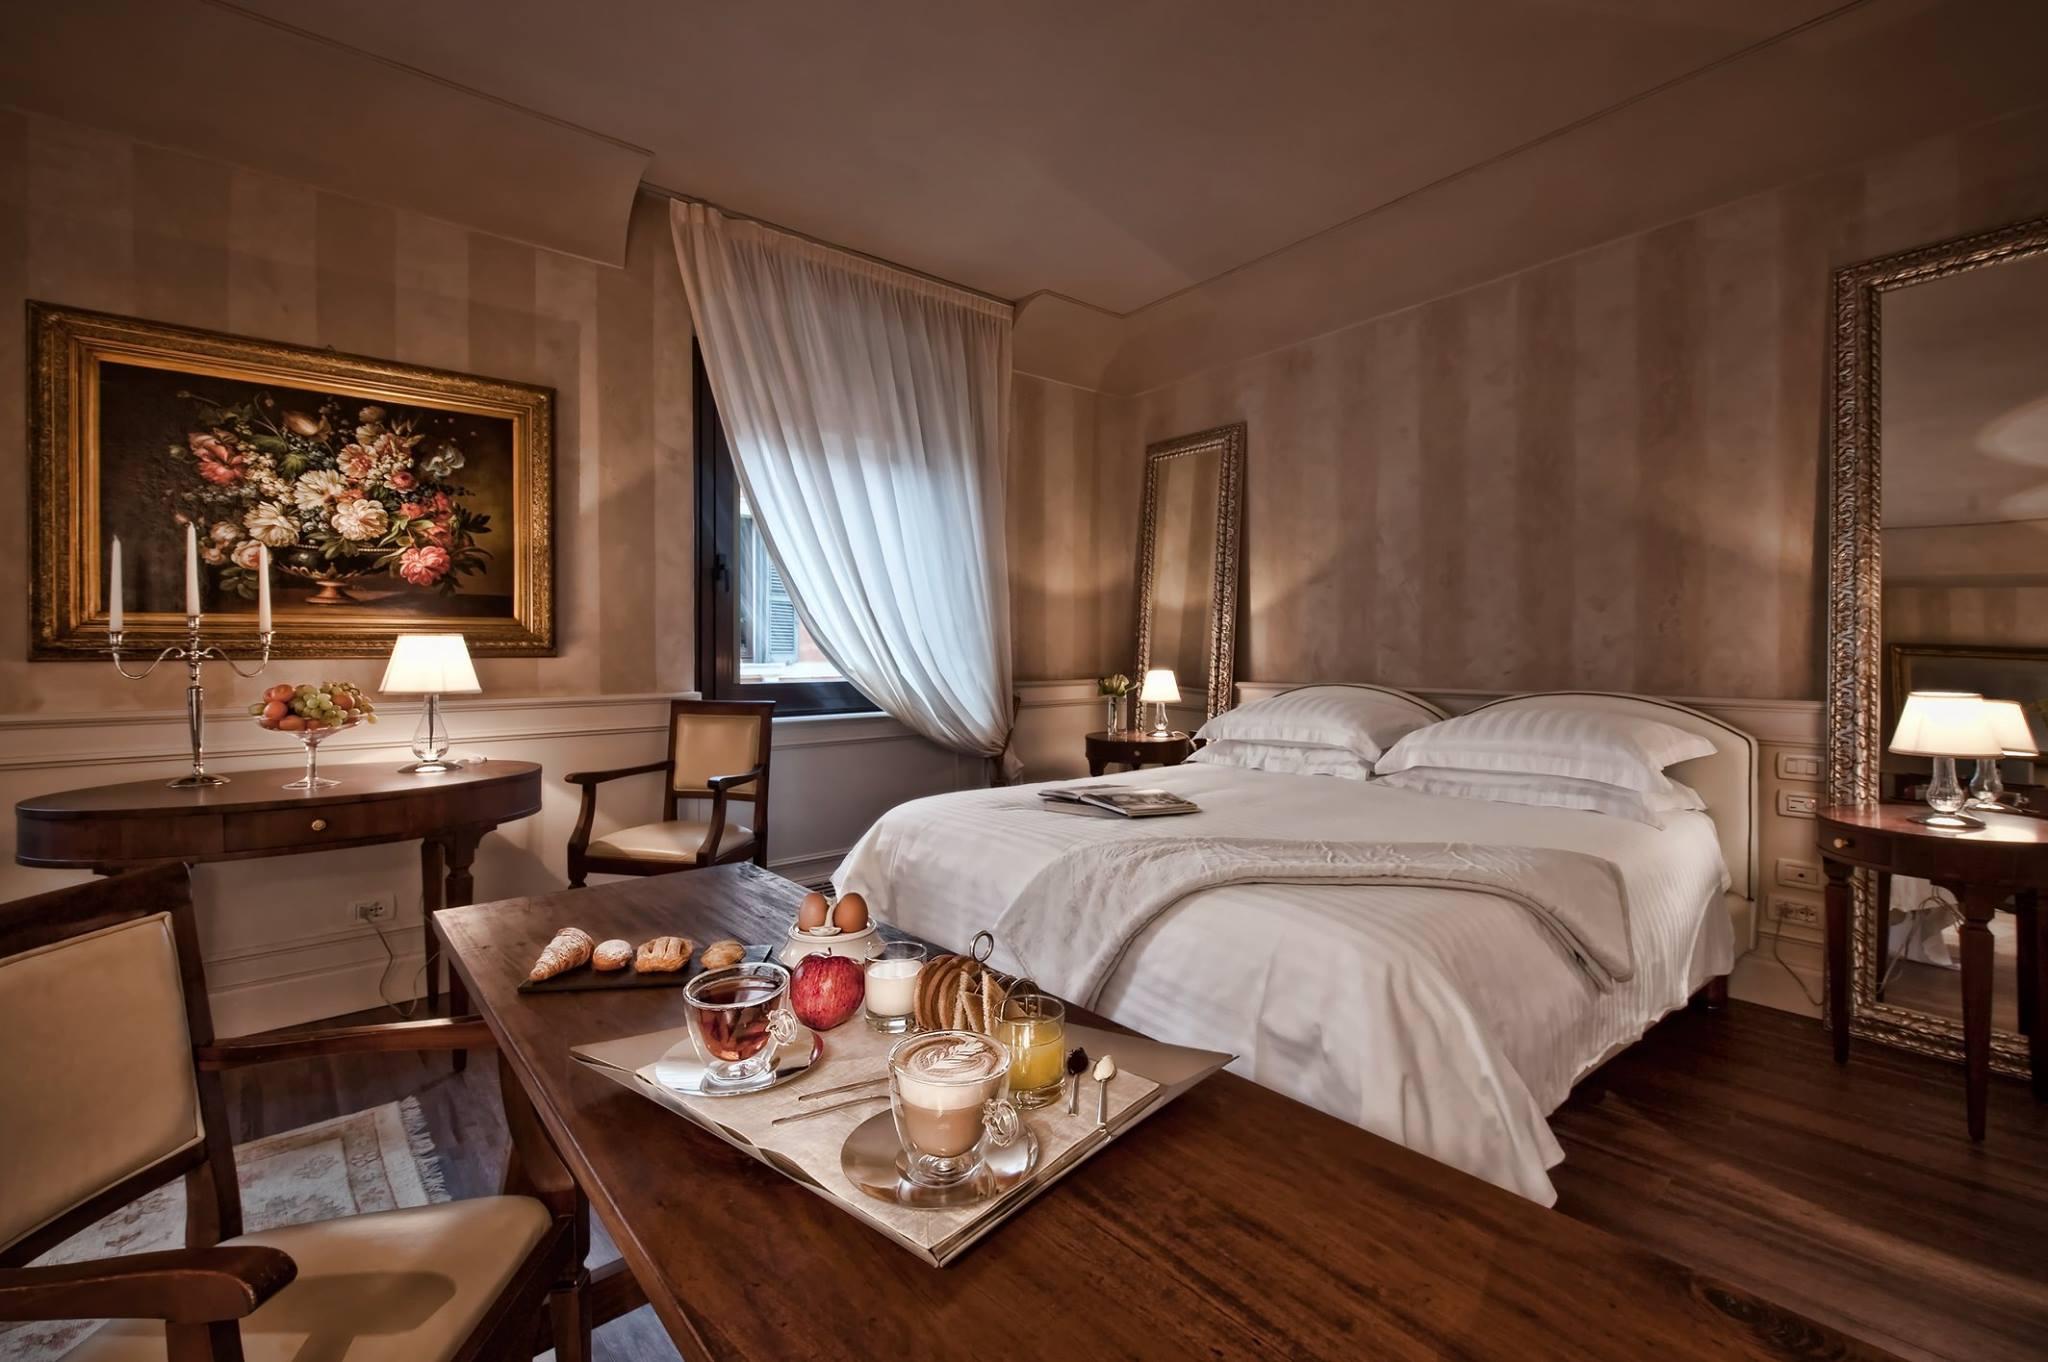 One of the opulent rooms at welcoming Palazzo Victoria, within Verona's historic centre